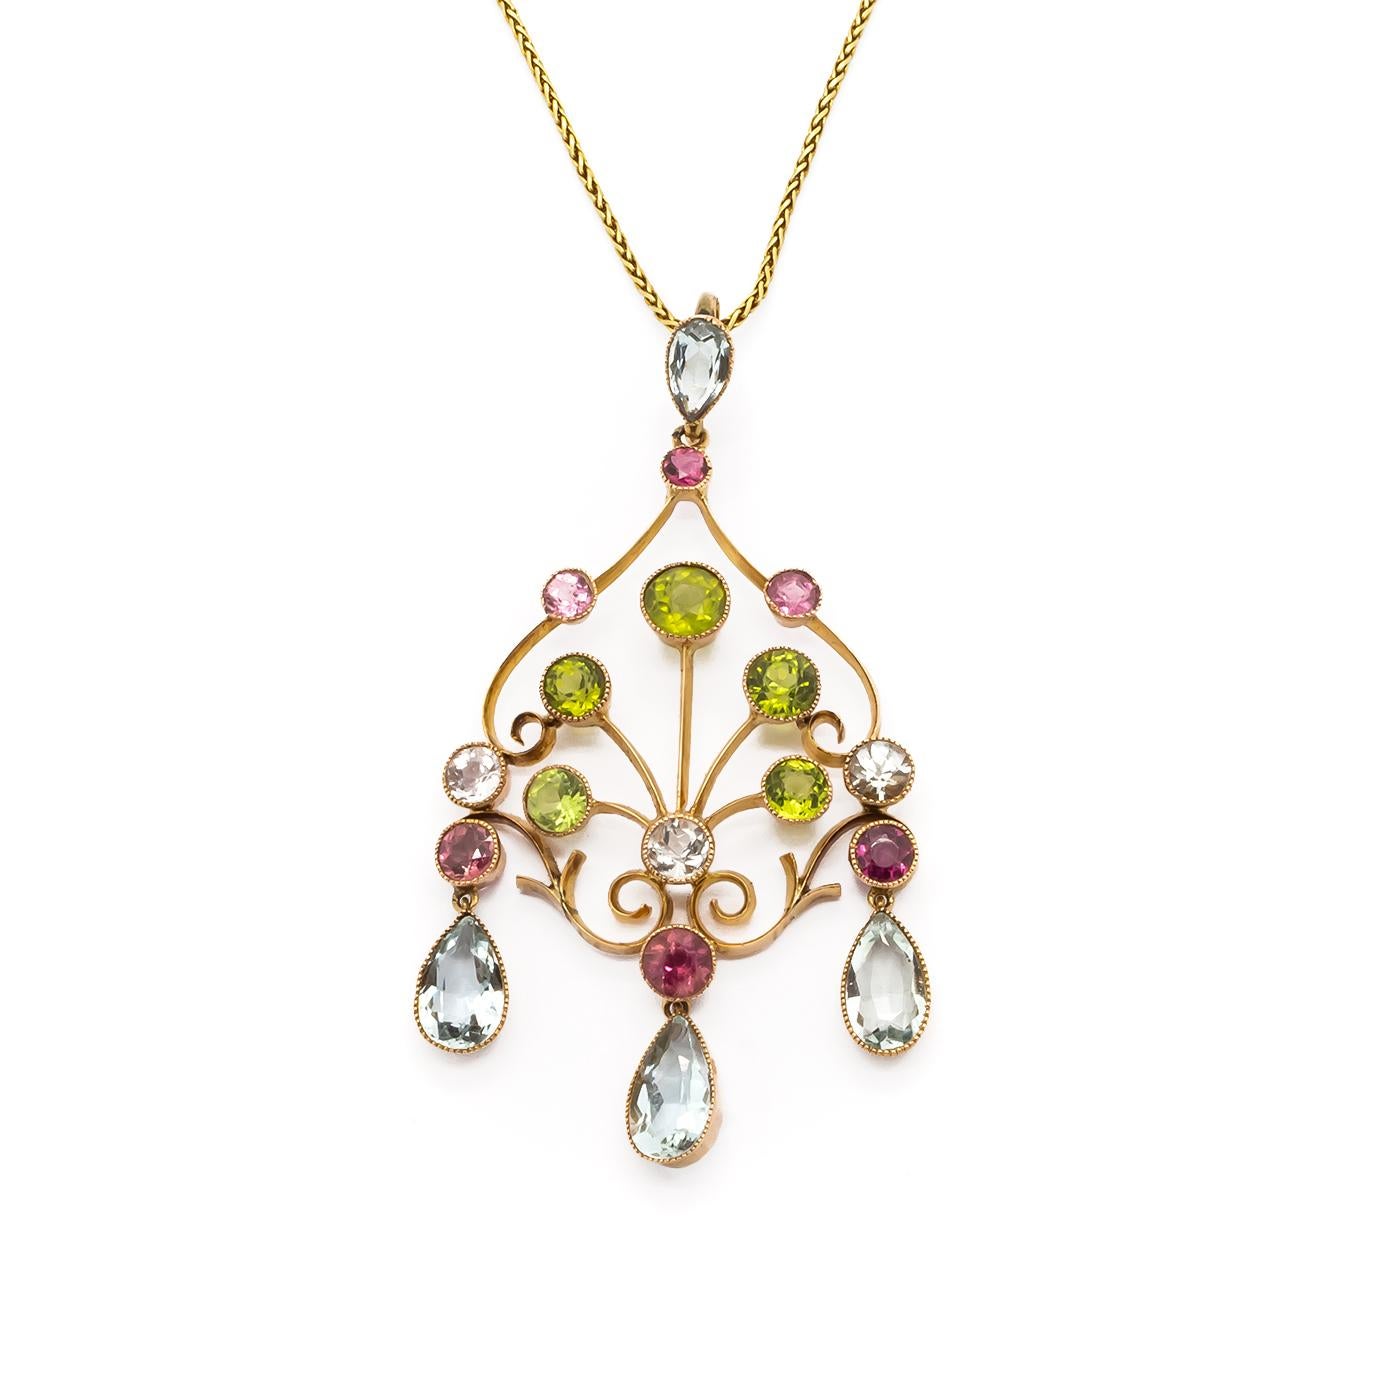 A gem-set pendant, with collet set pink tourmaline, peridot and aquamarines, suspended from a 14ct yellow gold frame, on a fine loop-in-loop link chain, measures 60 x 31mm, chain length 50cm